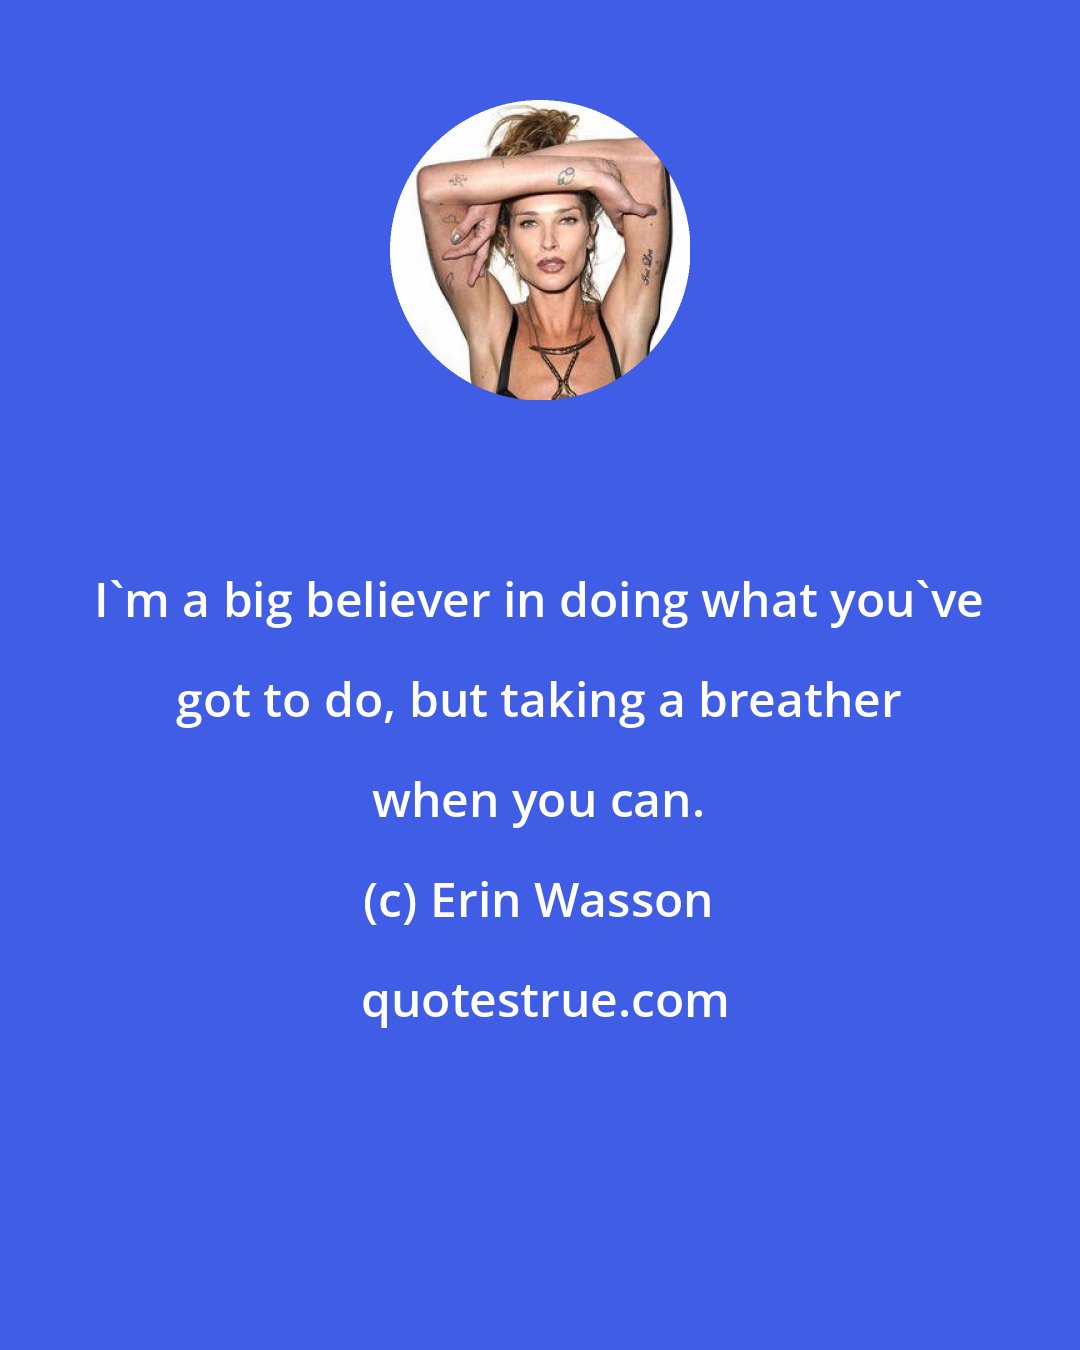 Erin Wasson: I'm a big believer in doing what you've got to do, but taking a breather when you can.